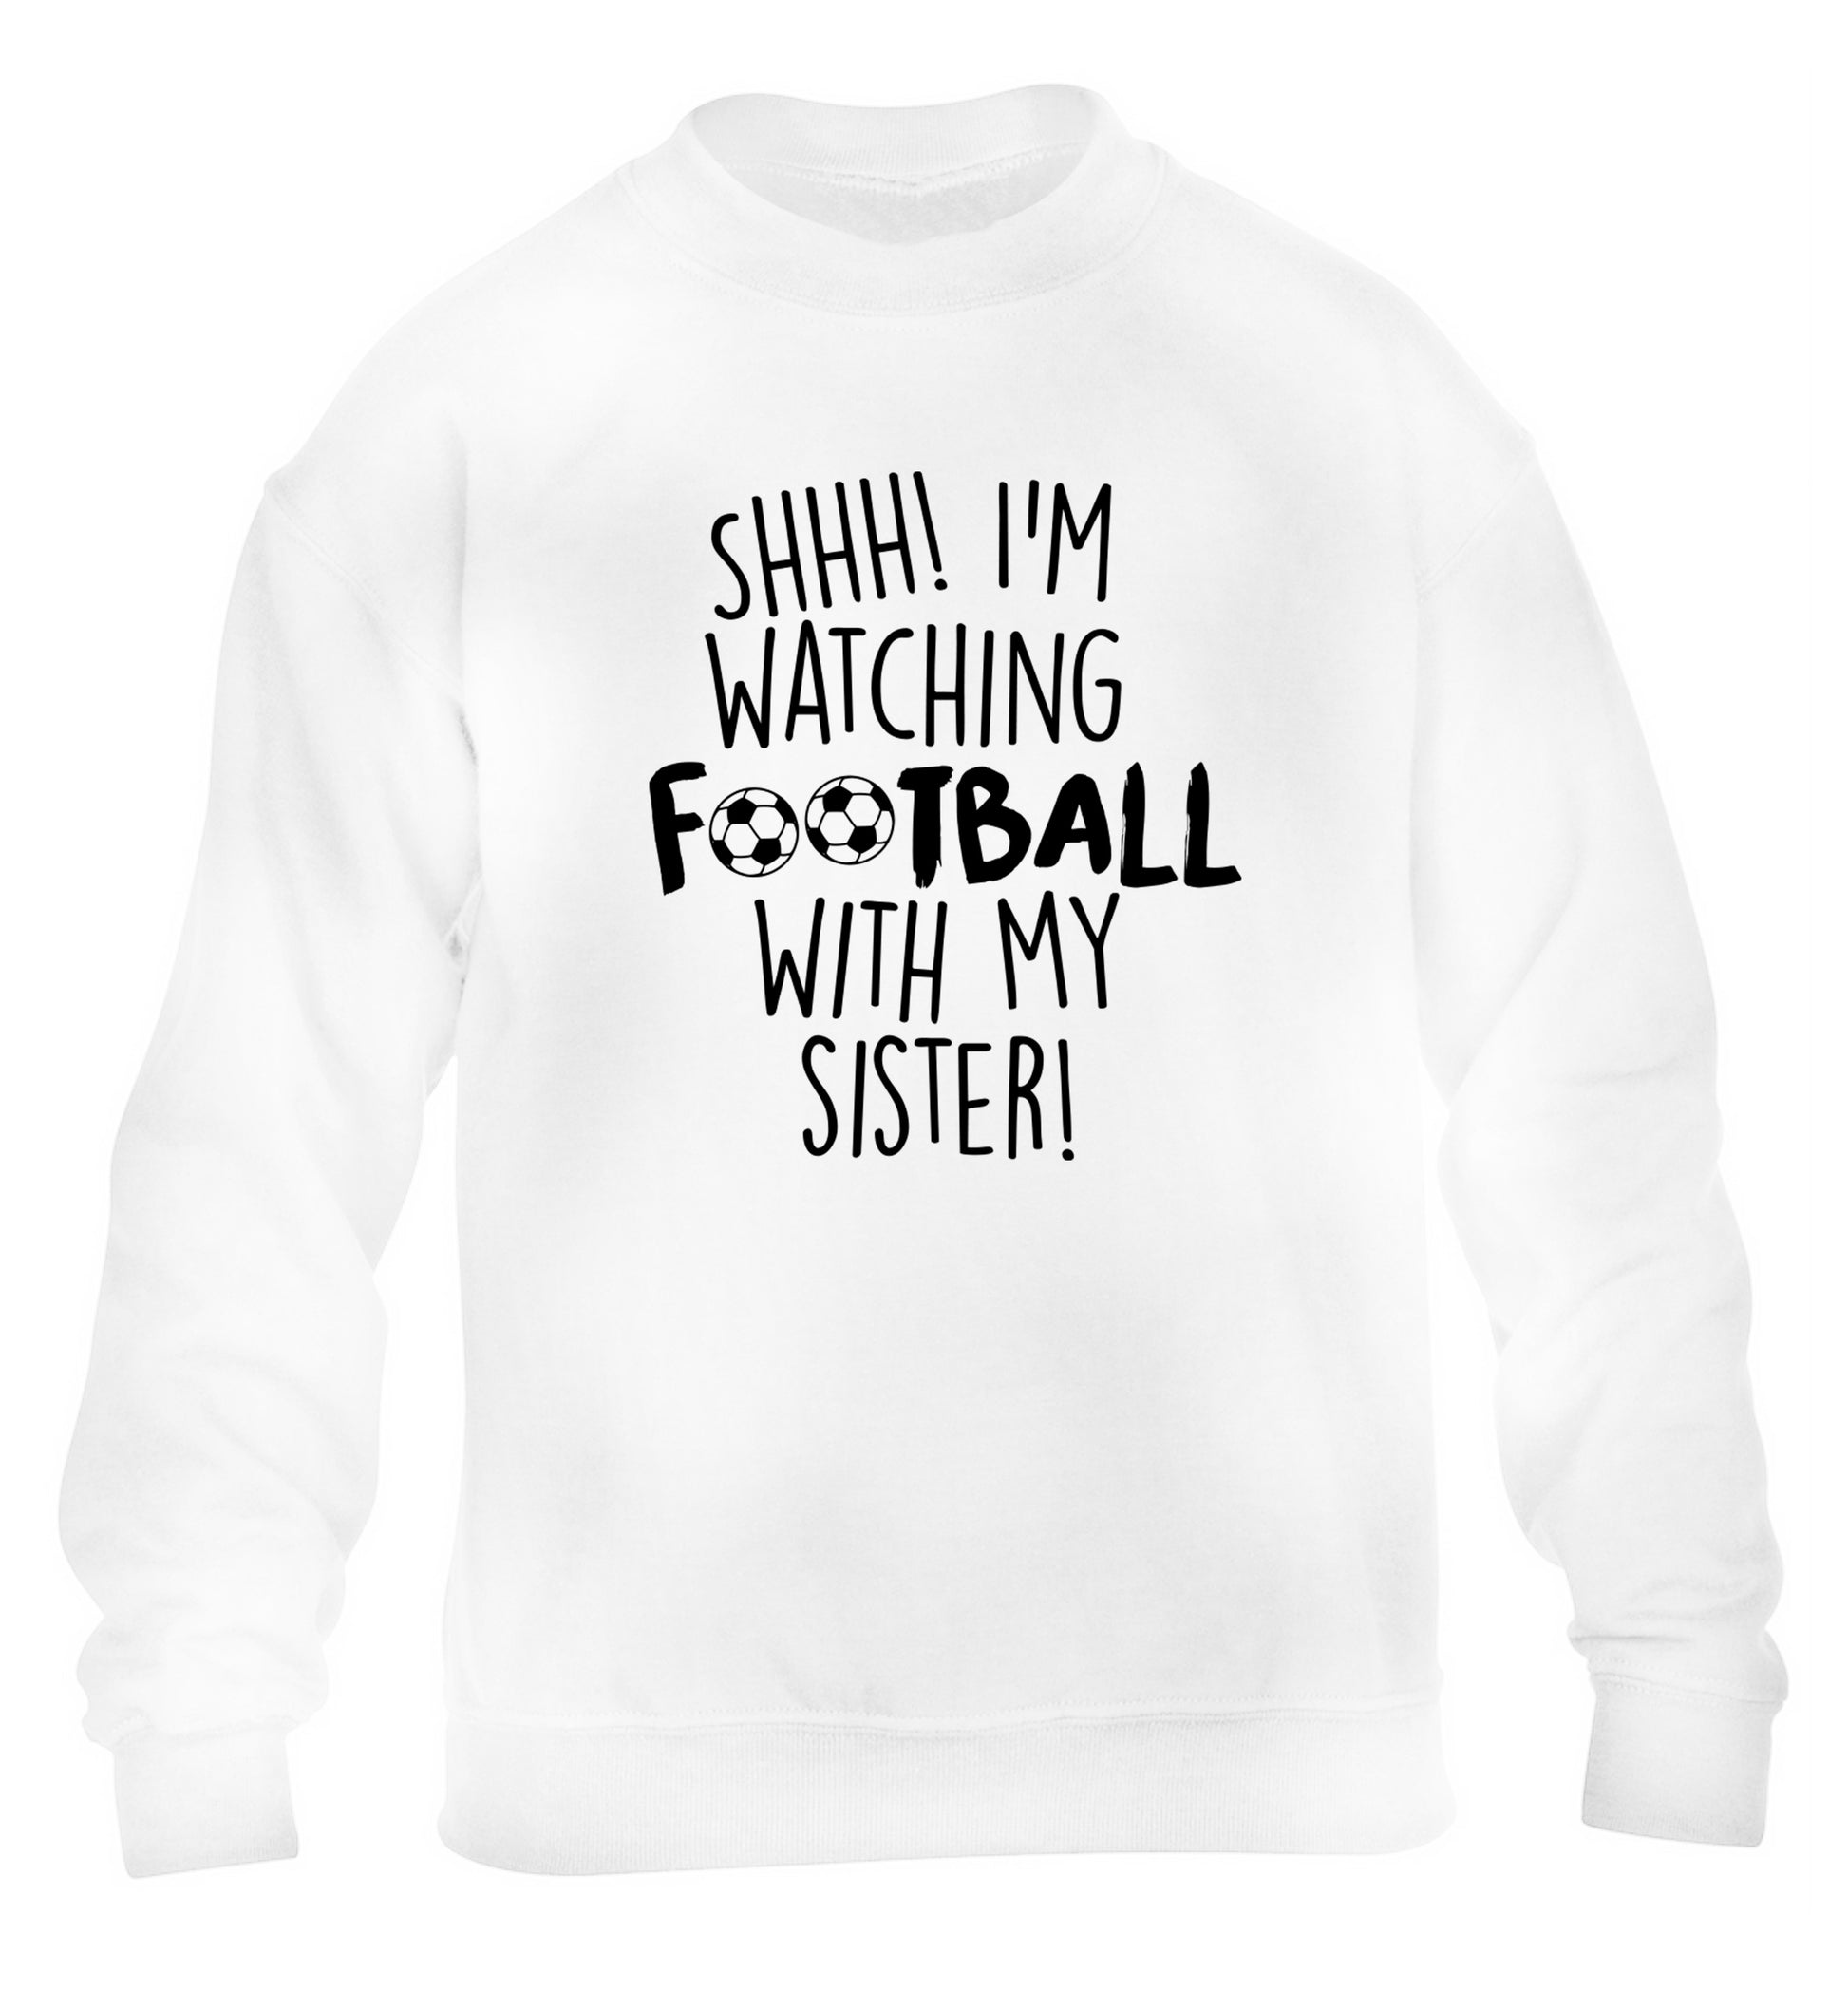 Shhh I'm watching football with my sister children's white sweater 12-14 Years